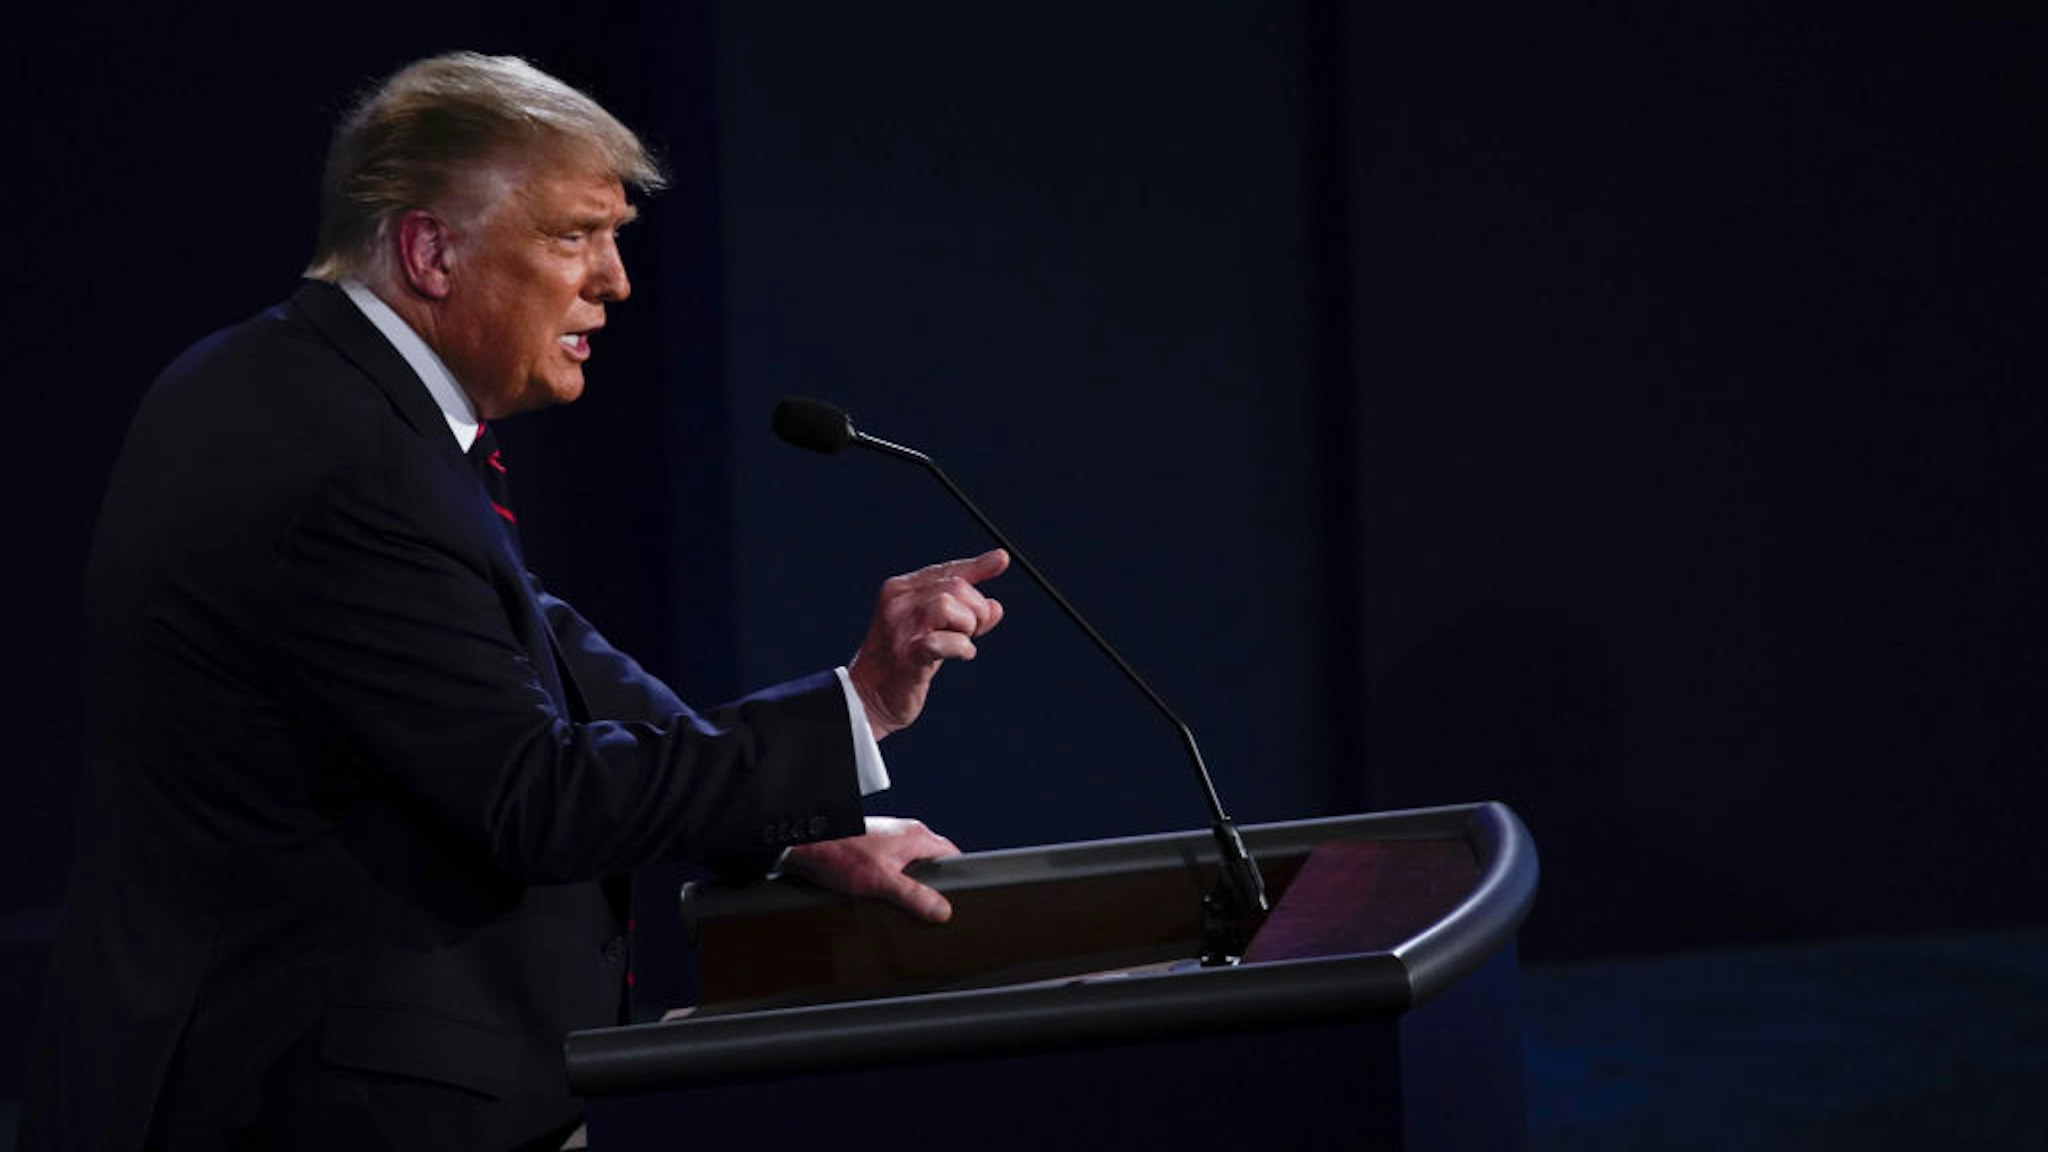 U.S. President Donald Trump speaks during the first U.S. presidential debate hosted by Case Western Reserve University and the Cleveland Clinic in Cleveland, Ohio, U.S., on Tuesday, Sept. 29, 2020.